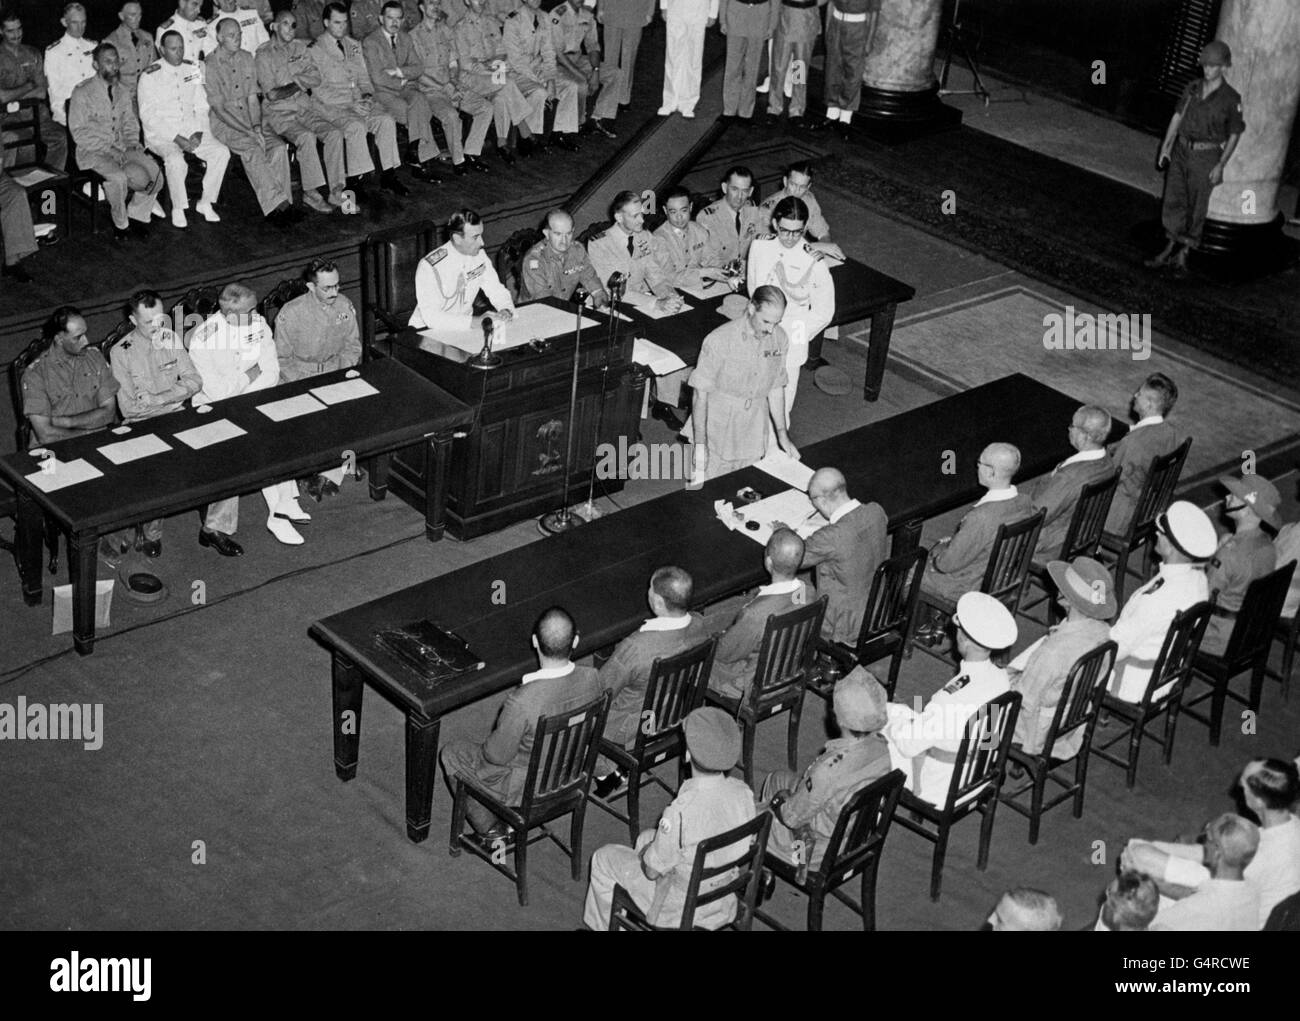 Lord Louis Mountbatten, Commander of the Allied forces in South East Asia, presides as General Itagaki of the Japanese Imperial Army signs the surrender document in Singapore. Stock Photo